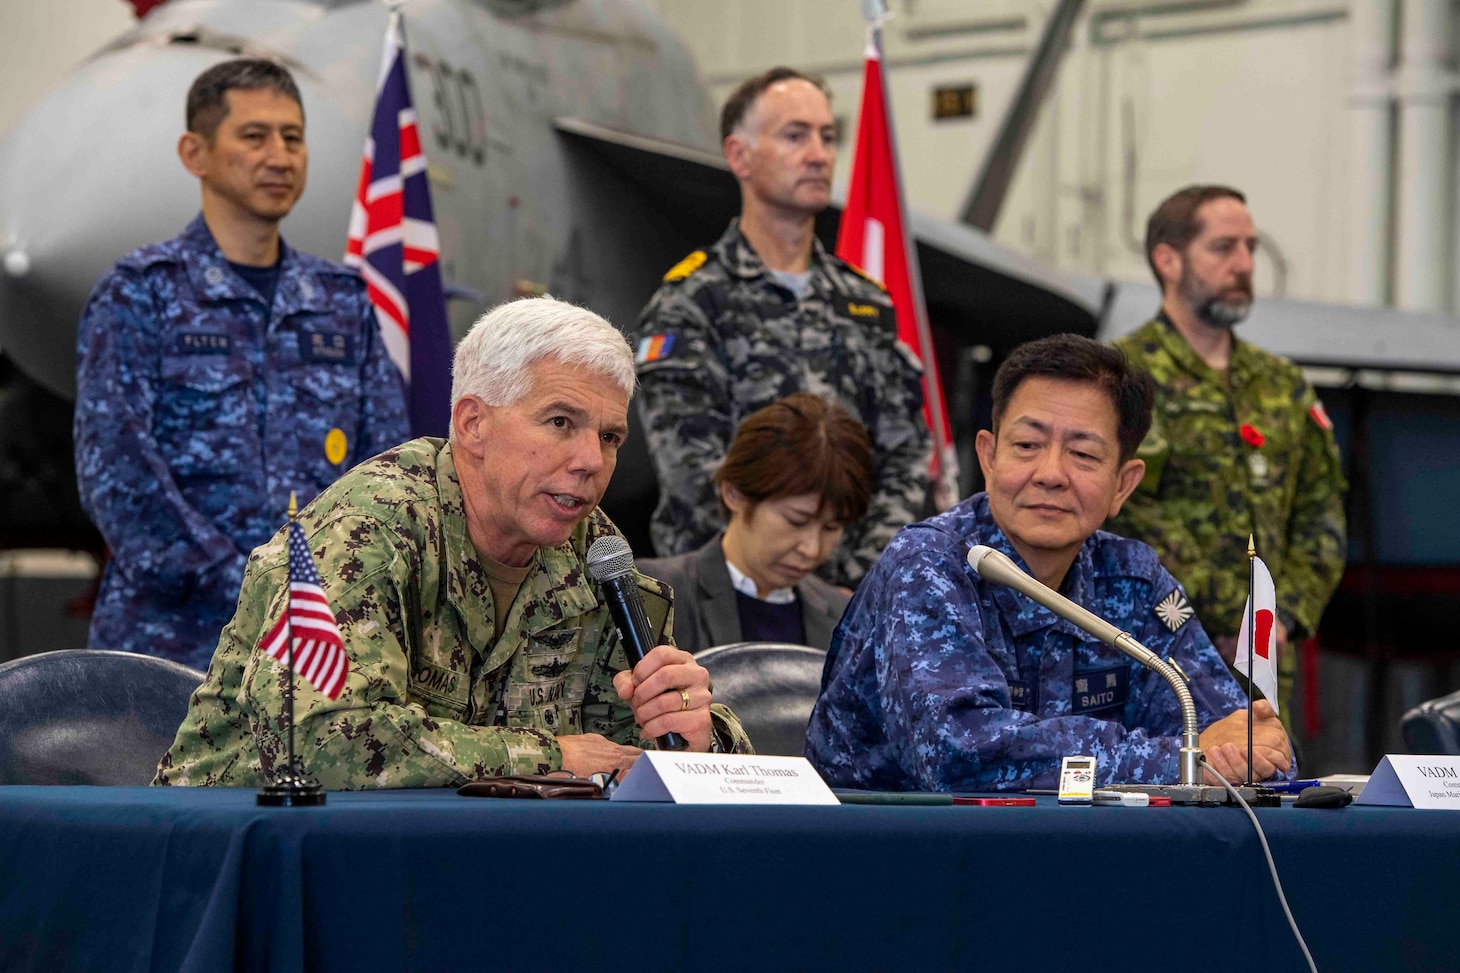 231111-N-TL932-1247 PHILIPPINE SEA (Nov. 11, 2023) Vice Adm. Karl Thomas, left, Commander, 7th Fleet and Vice Adm. Akira Saito, Commander in Chief, Self-Defense Fleet, Japan Maritime Self-Defense Force, conduct a multilateral press conference aboard Nimitz-class aircraft carrier USS Carl Vinson (CVN 70) as part of Annual Exercise (ANNUALEX) 2023. ANNUALEX is a multilateral exercise conducted by naval elements of the Royal Australian, Royal Canadian, Japan Maritime Self-Defense Force, and U.S. navies to demonstrate naval interoperability and a joint commitment to a free and open Indo-Pacific. Vinson, flagship of Carrier Strike Group ONE, is deployed to the U.S. 7th Fleet area of operations in support of a free and open Indo-Pacific. (U.S. Navy photo by Mass Communication Specialist 3rd Class Joshua Sapien)